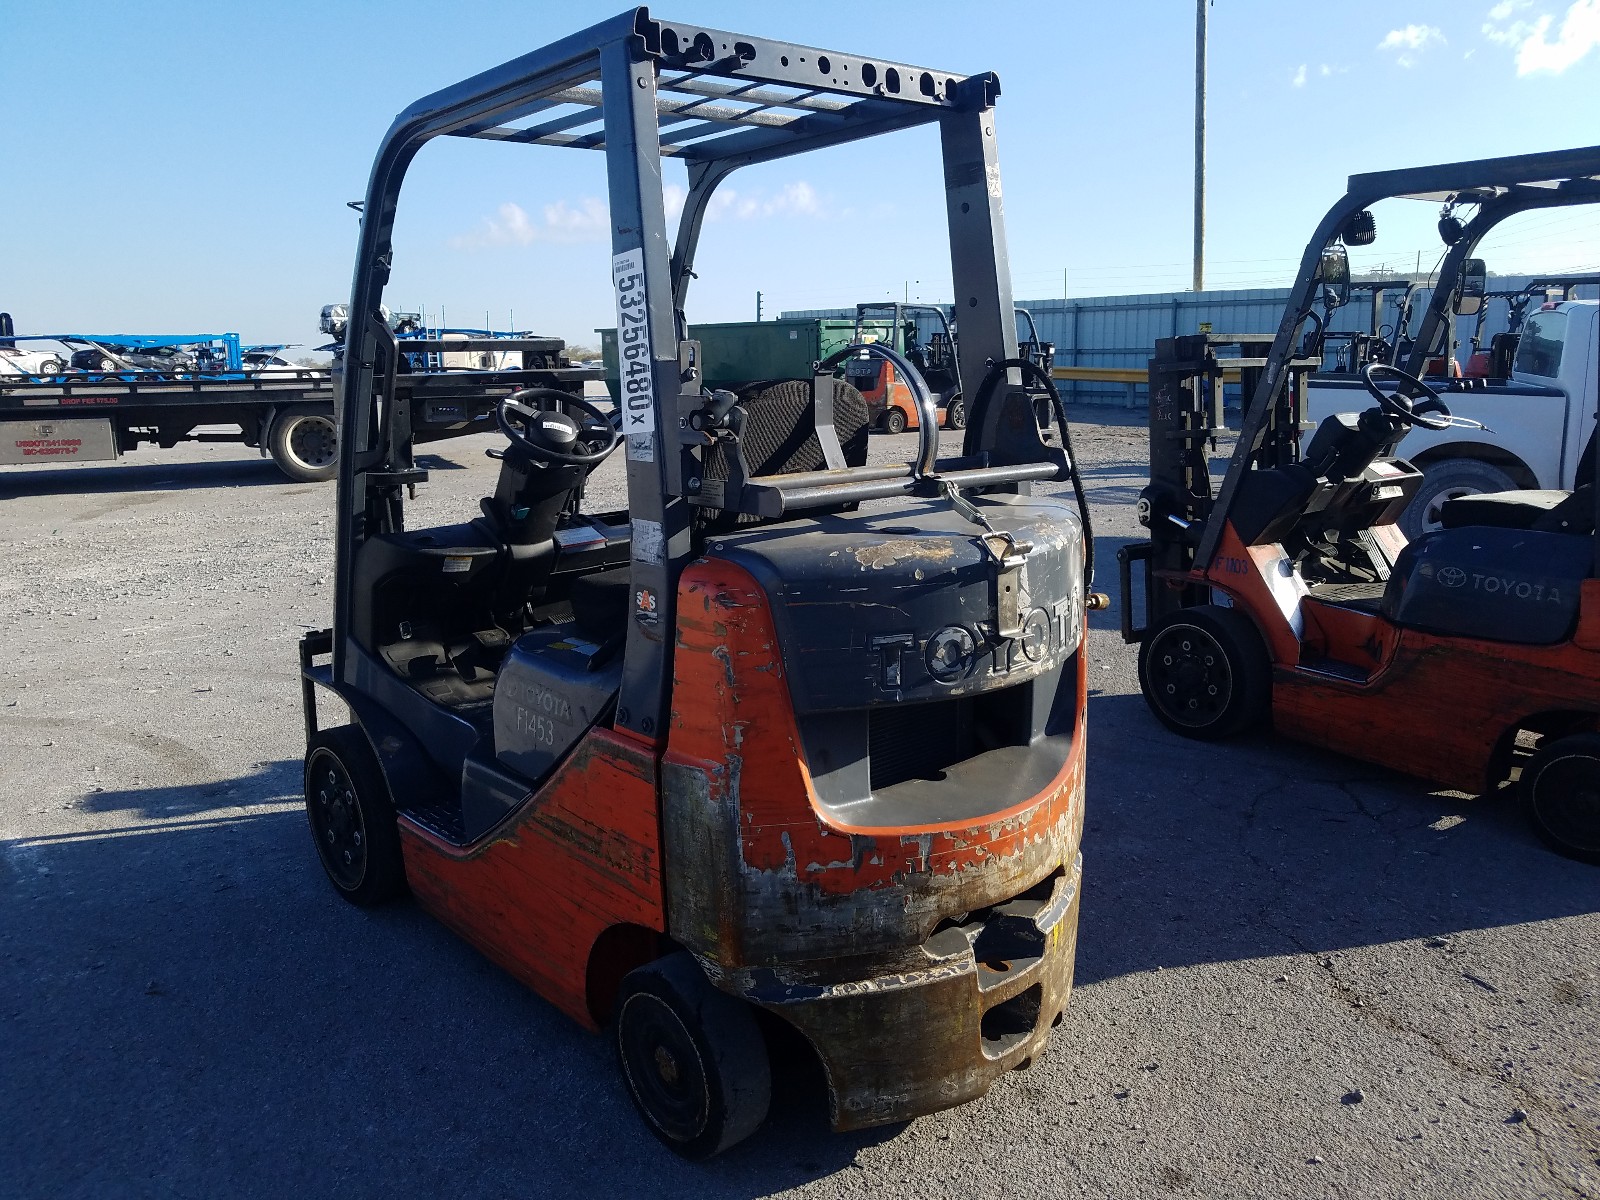 2014 Toyota Forklift For Sale At Copart Lebanon Tn Lot 53256480 Salvagereseller Com